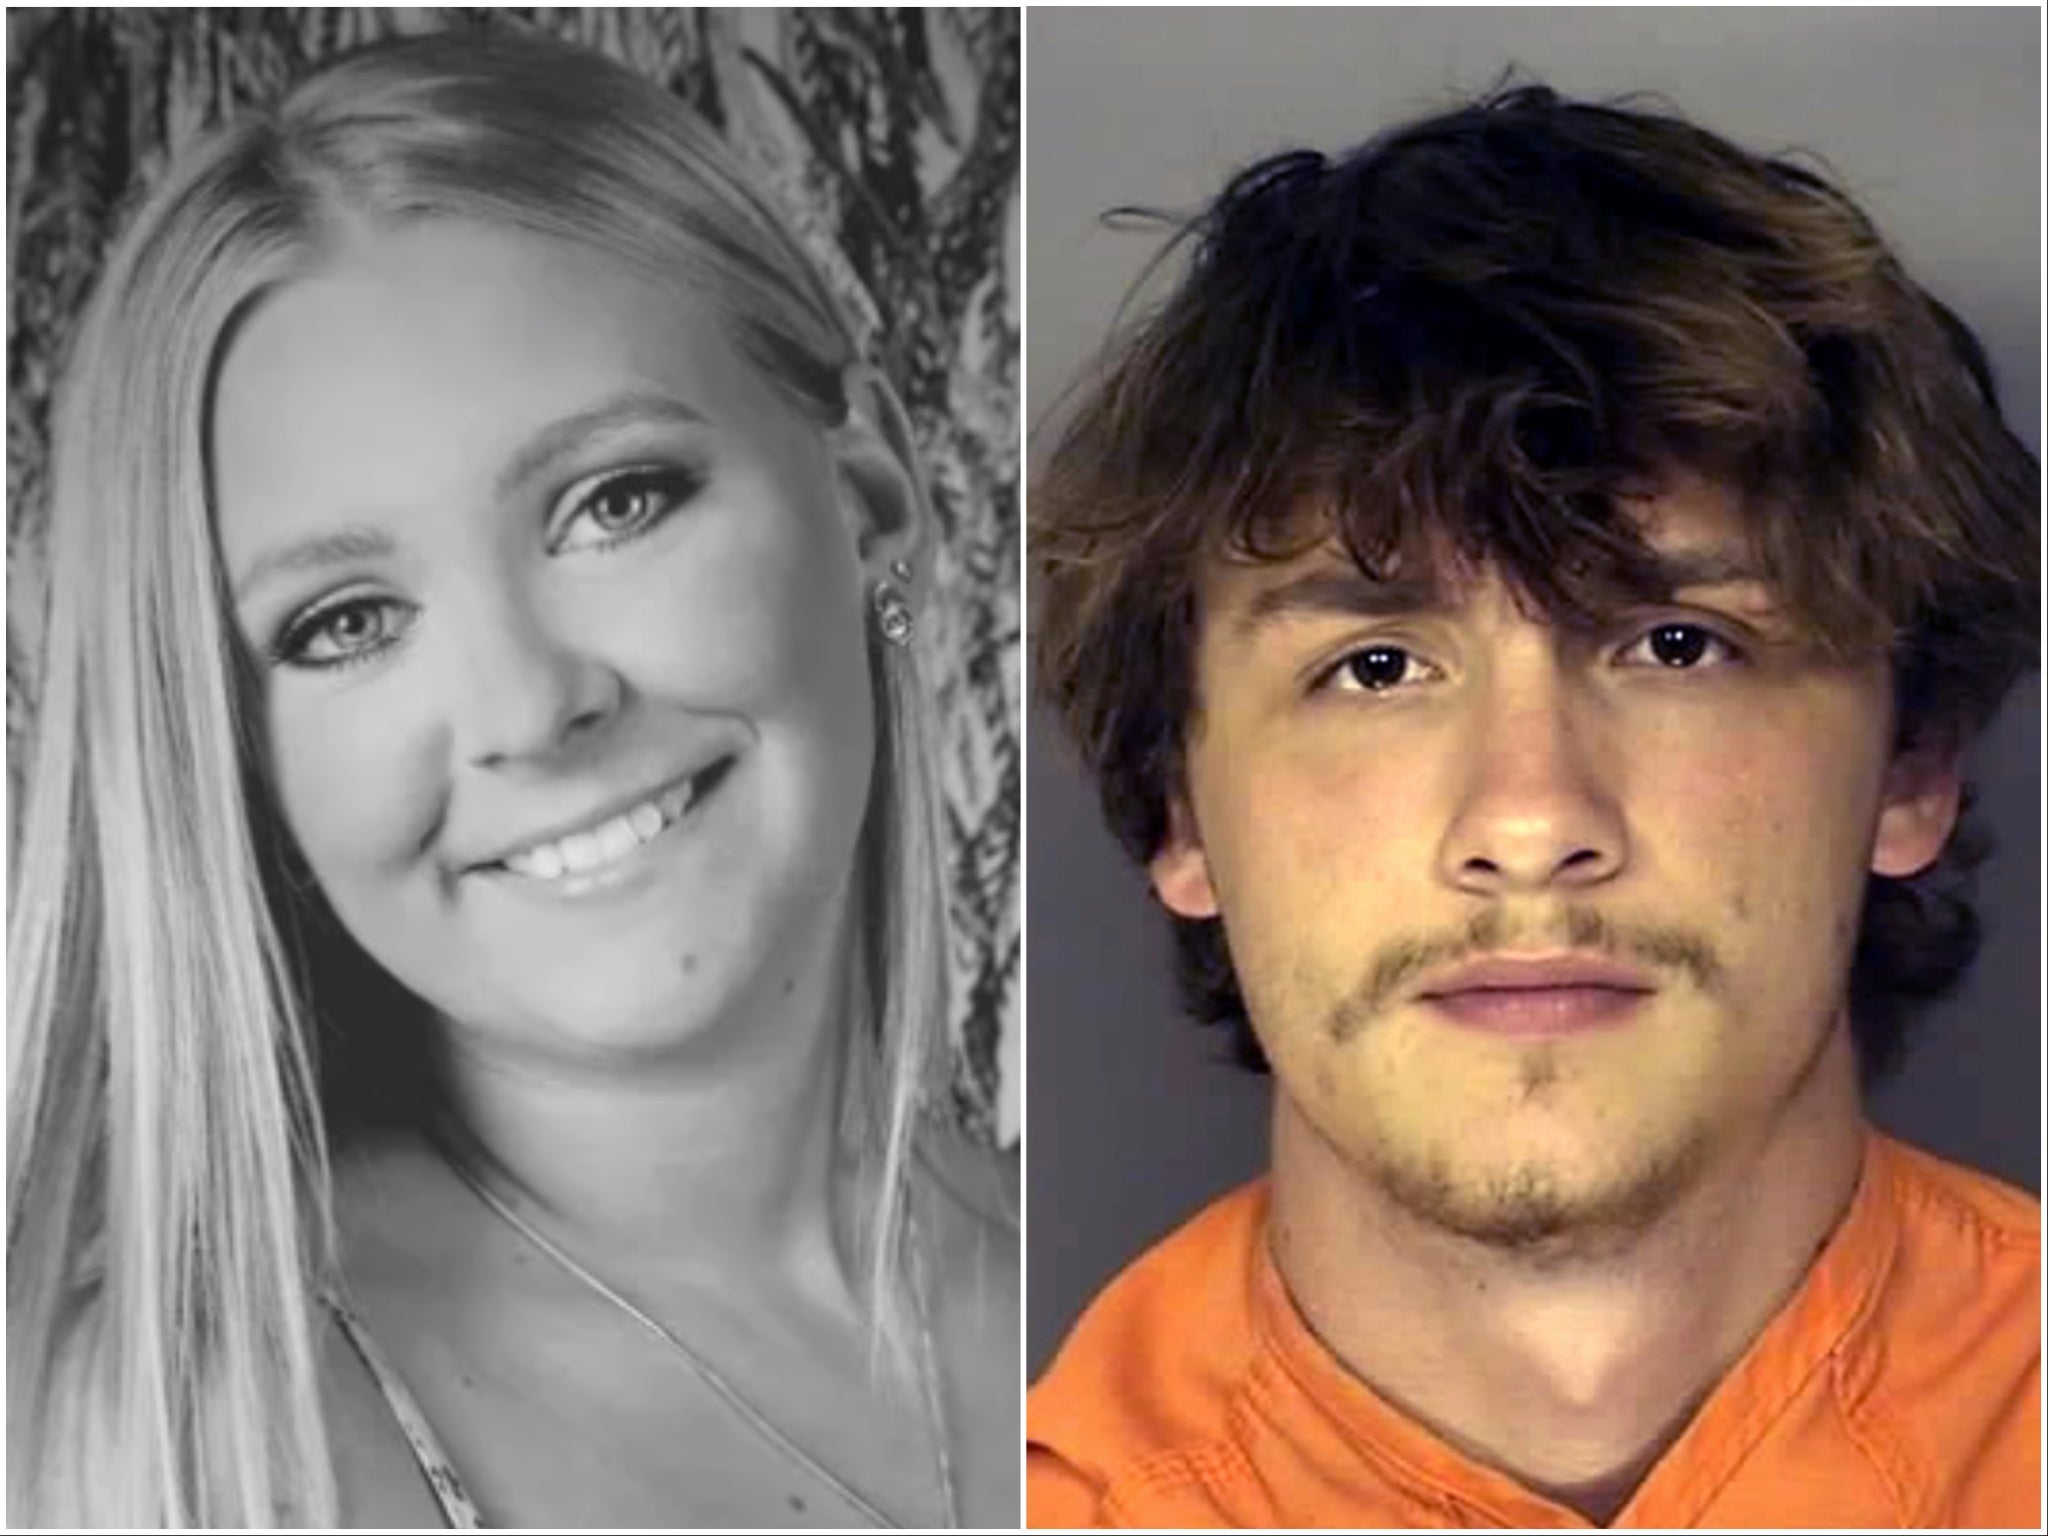 Blake Linkous, 18, (R) has been accused of the murder of Natalie Martin, also 18 (L)